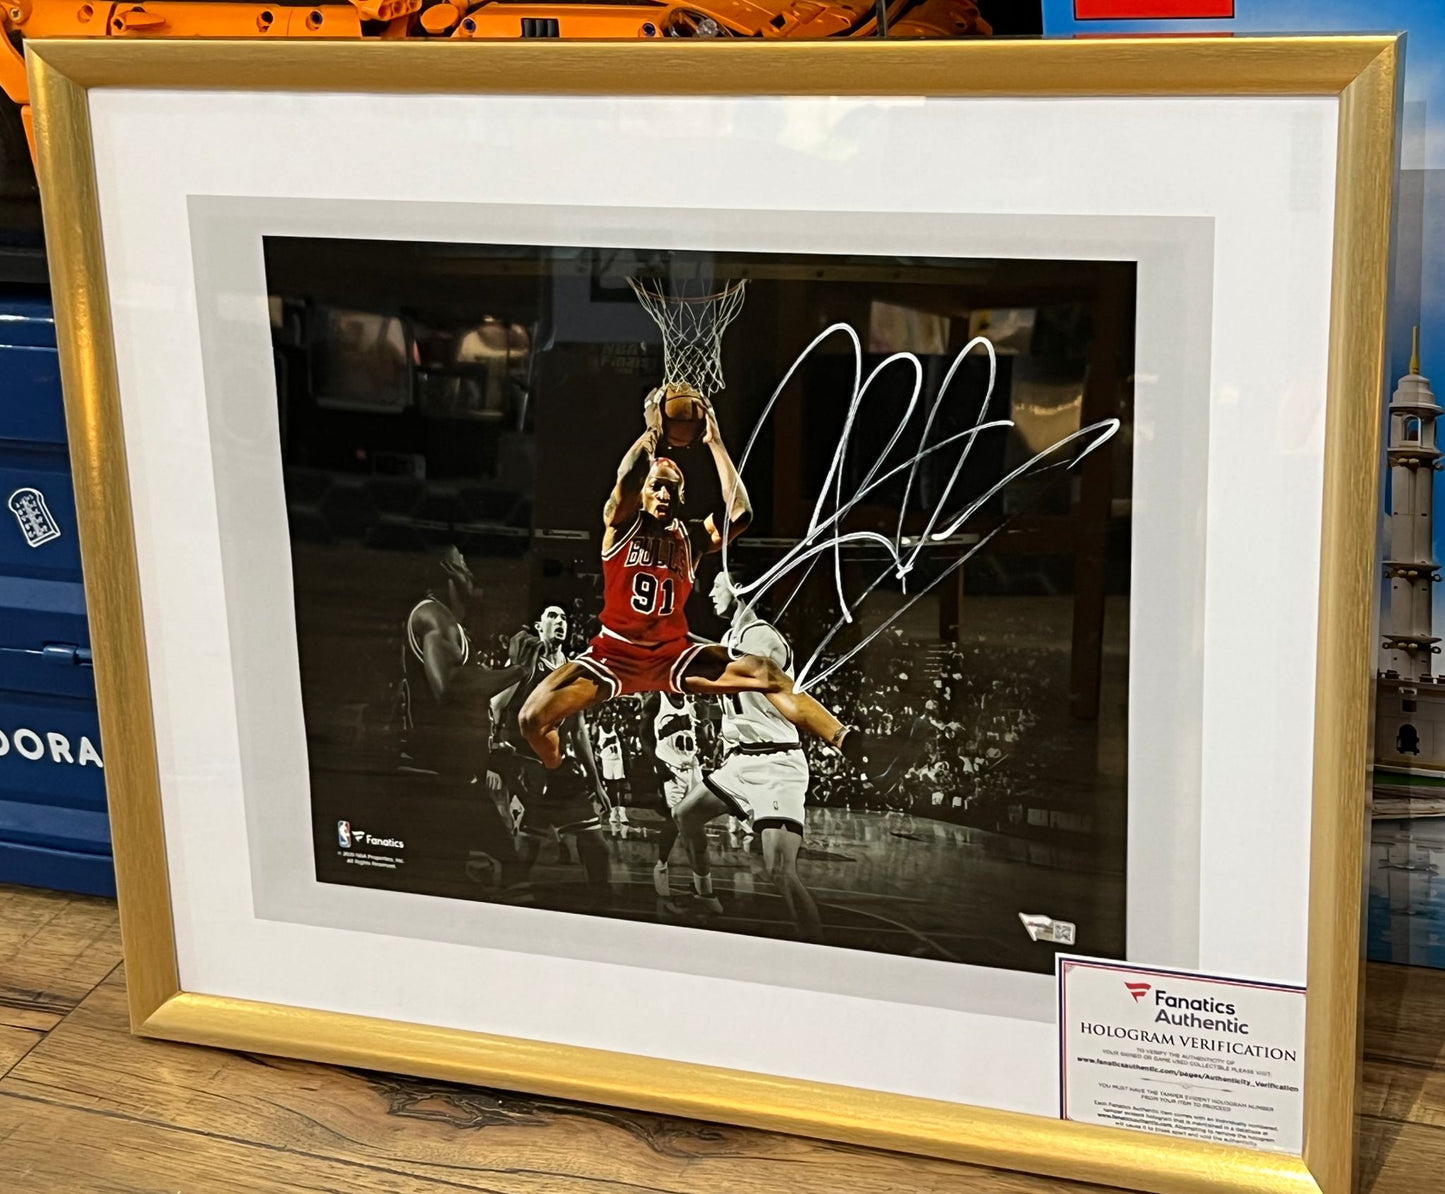 Denis Rodman signed 1996 NBA finals photograph (framed) 16 x 20 inches